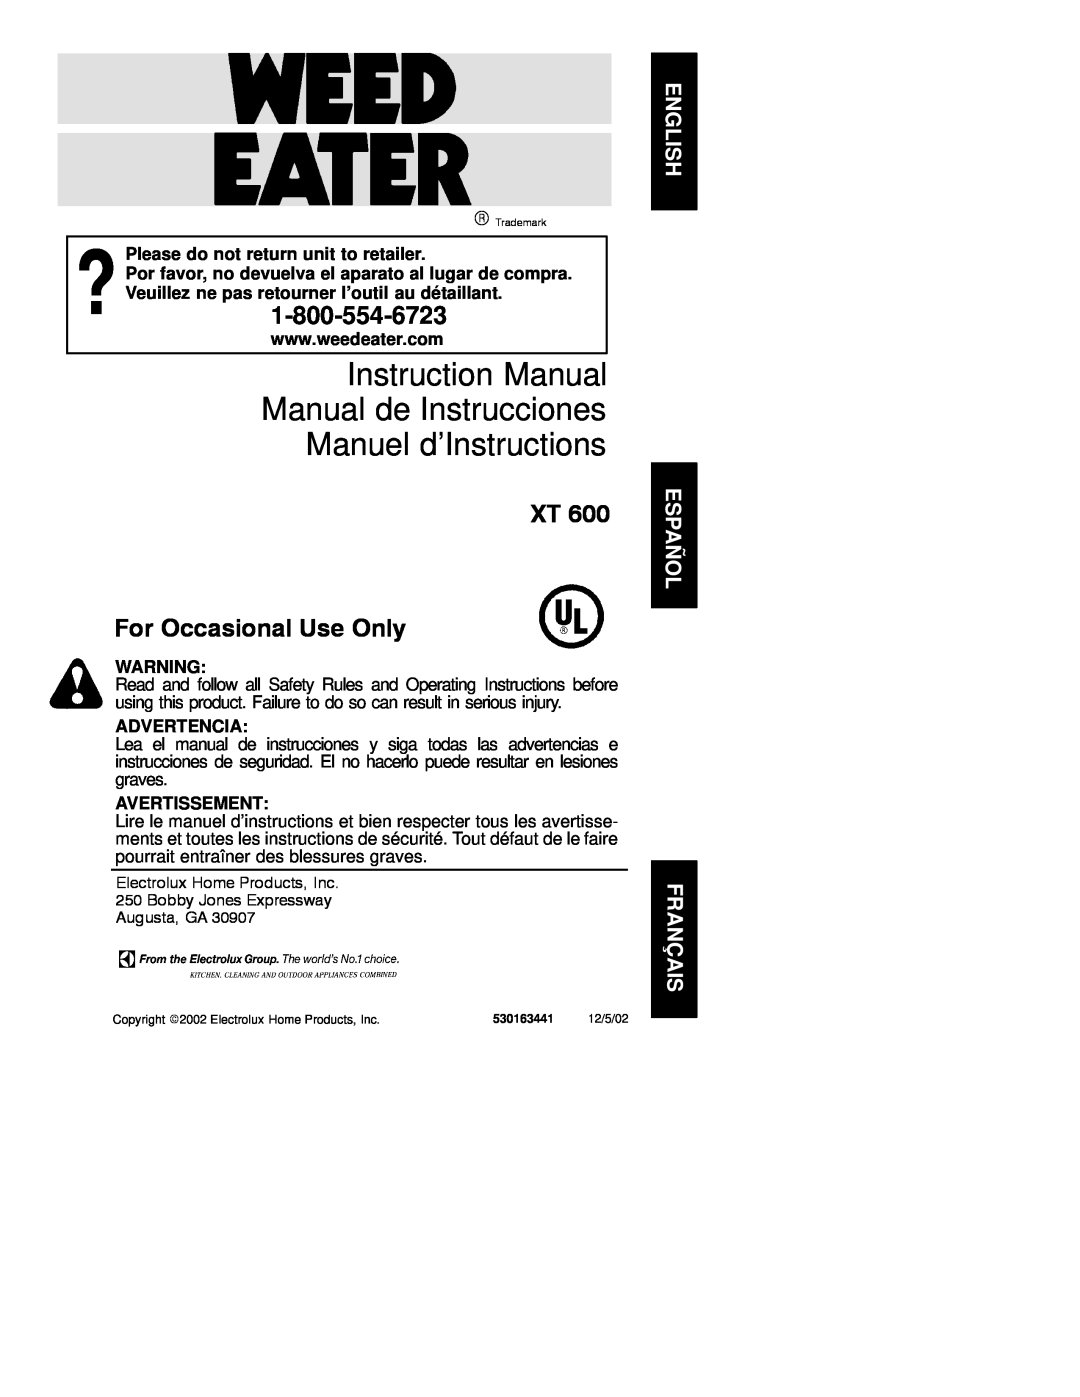 Weed Eater 530163441 instruction manual XT For Occasional Use Only, Please do not return unit to retailer, Advertencia 